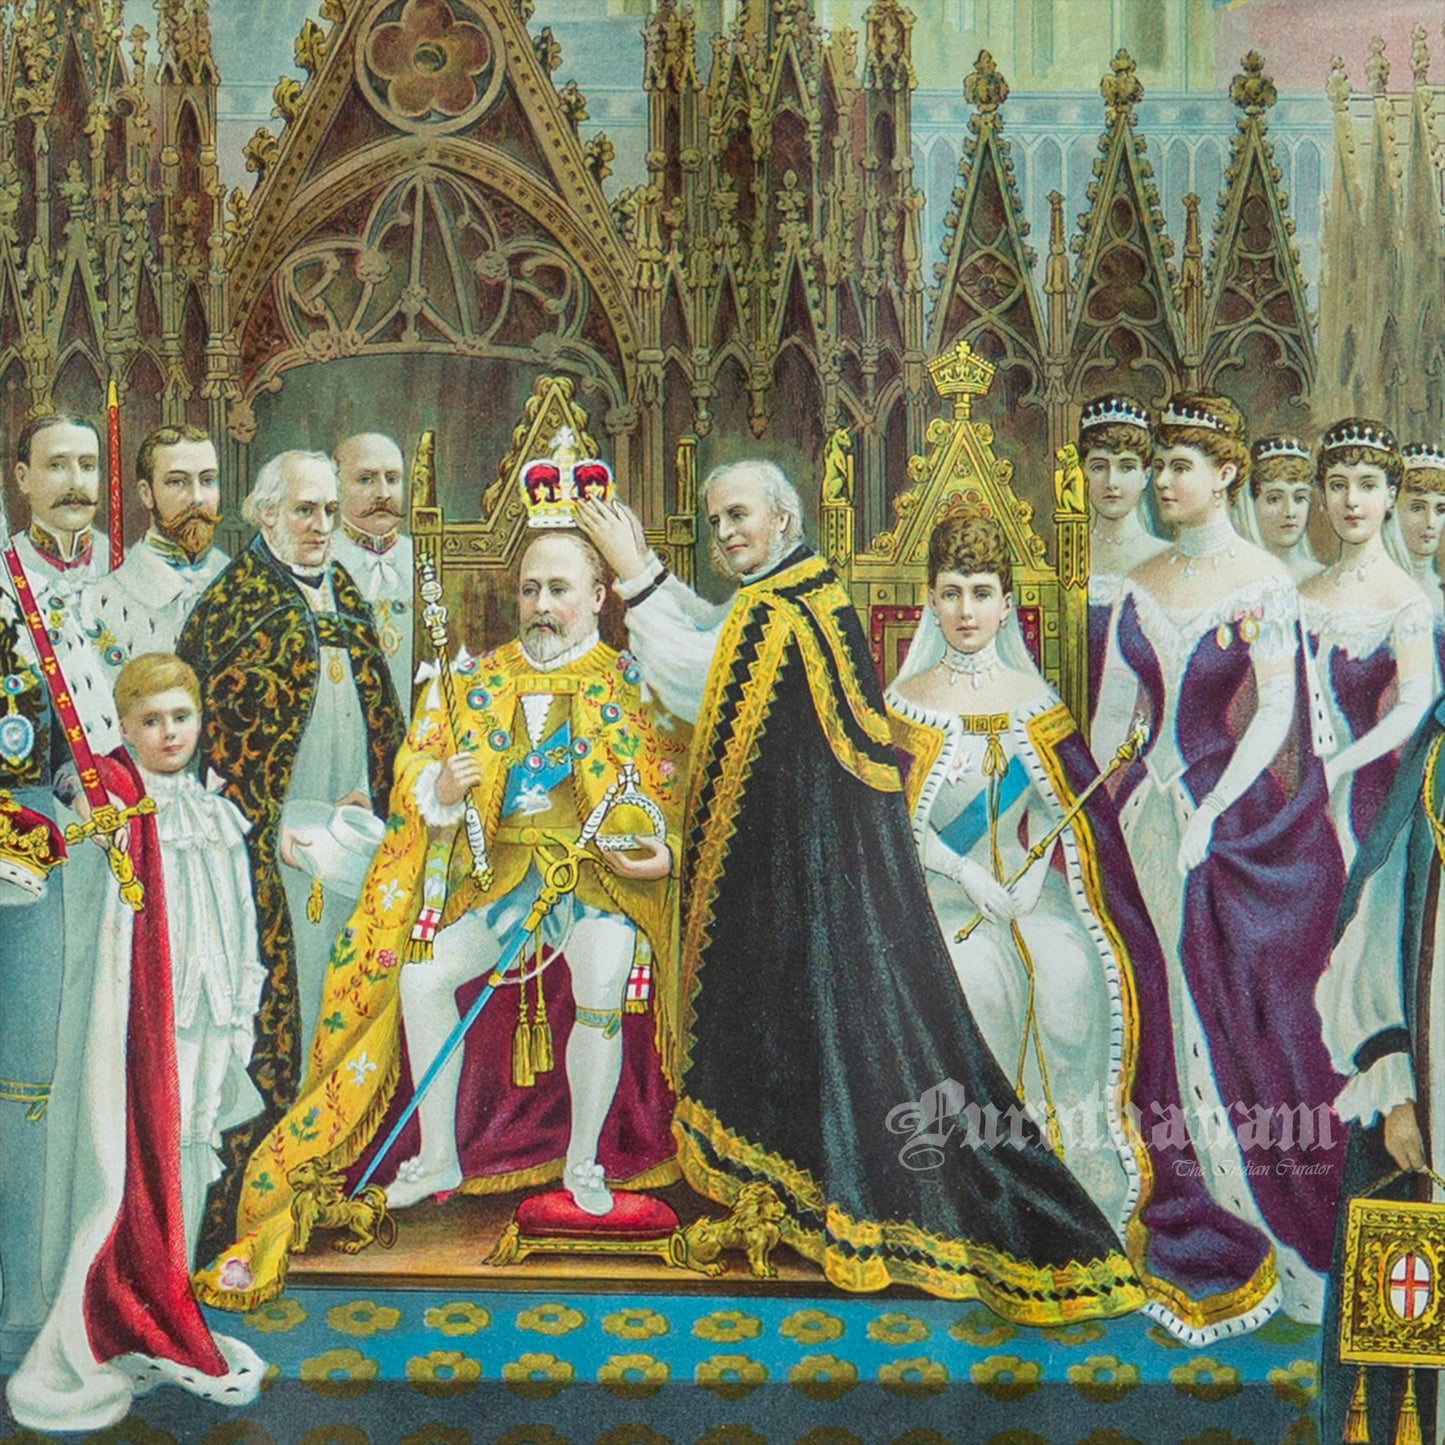 Coronation of King Edward VII and Queen Alexandra in 1902 - Chromolithograph Print, London